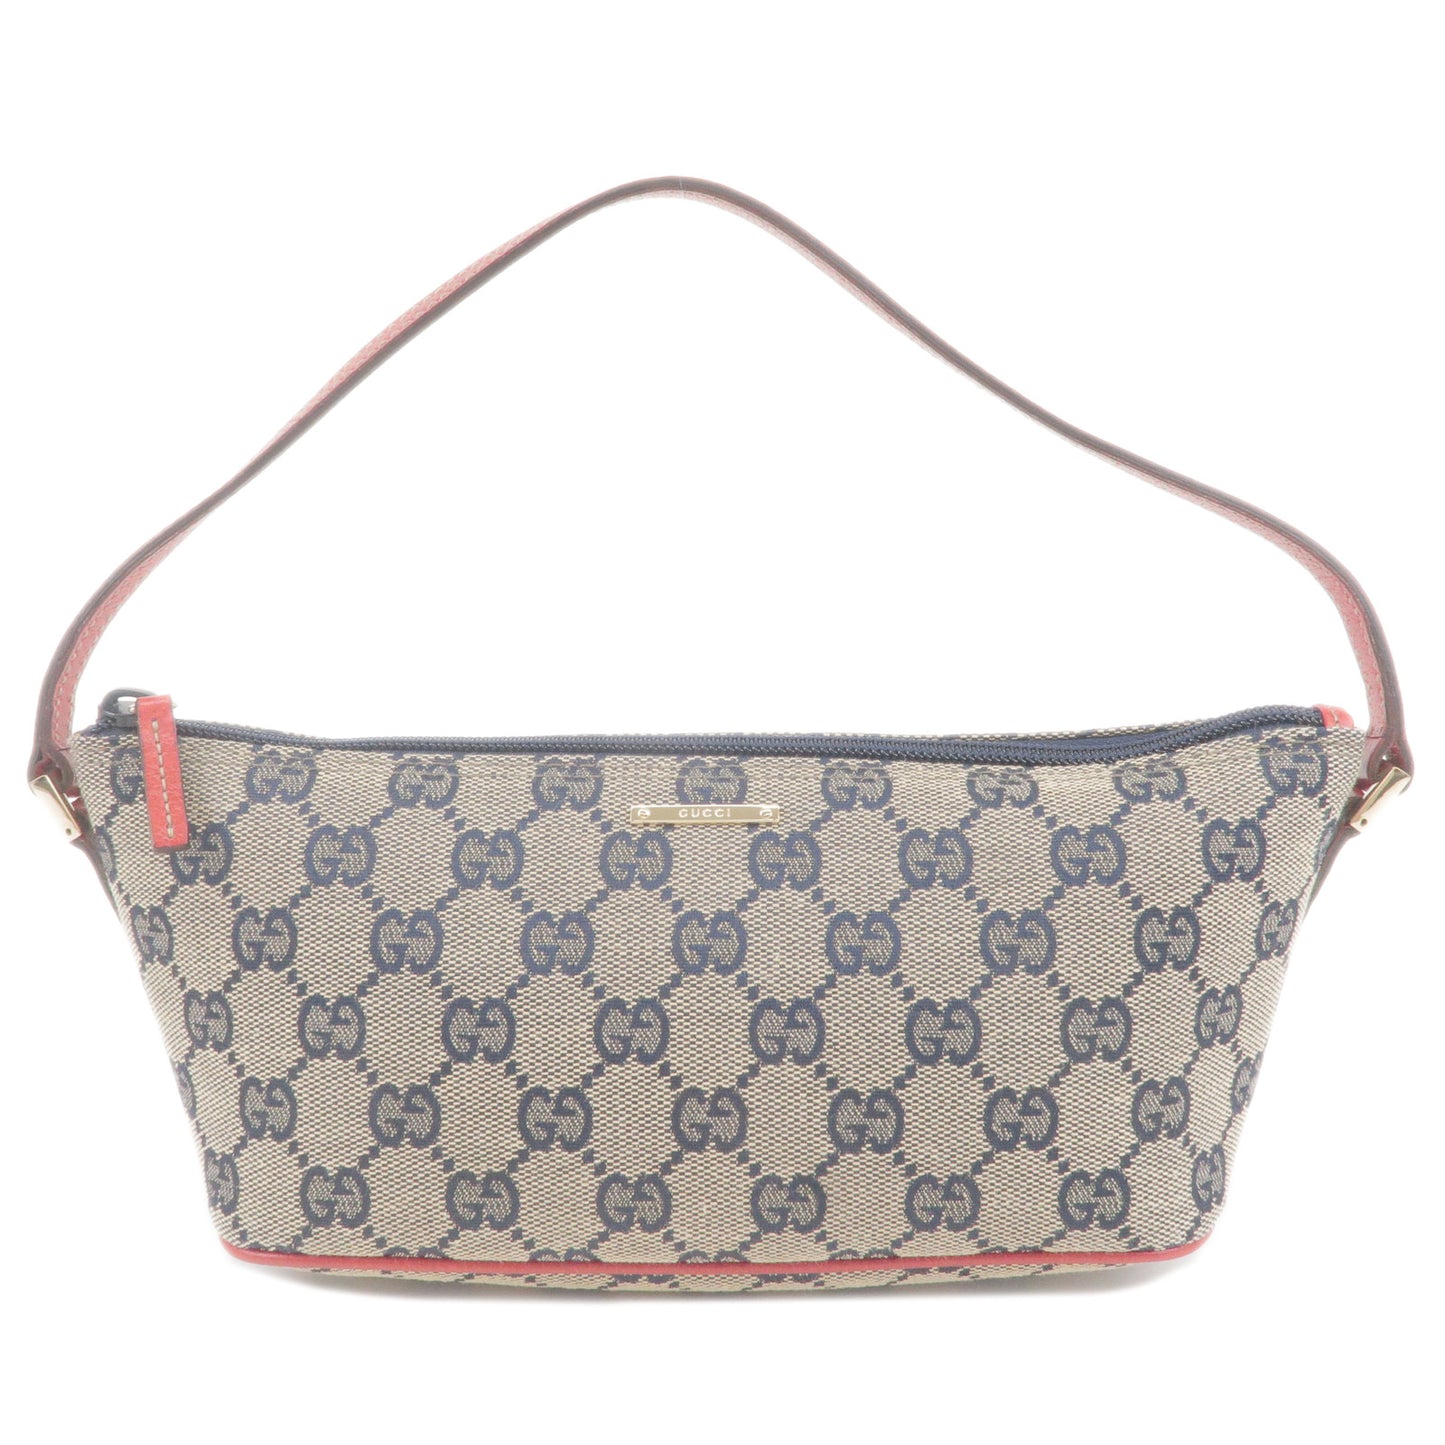 GUCCI-Boat-Bag-GG-Canvas-Leather-Hand-Bag-Beige-Red-07198